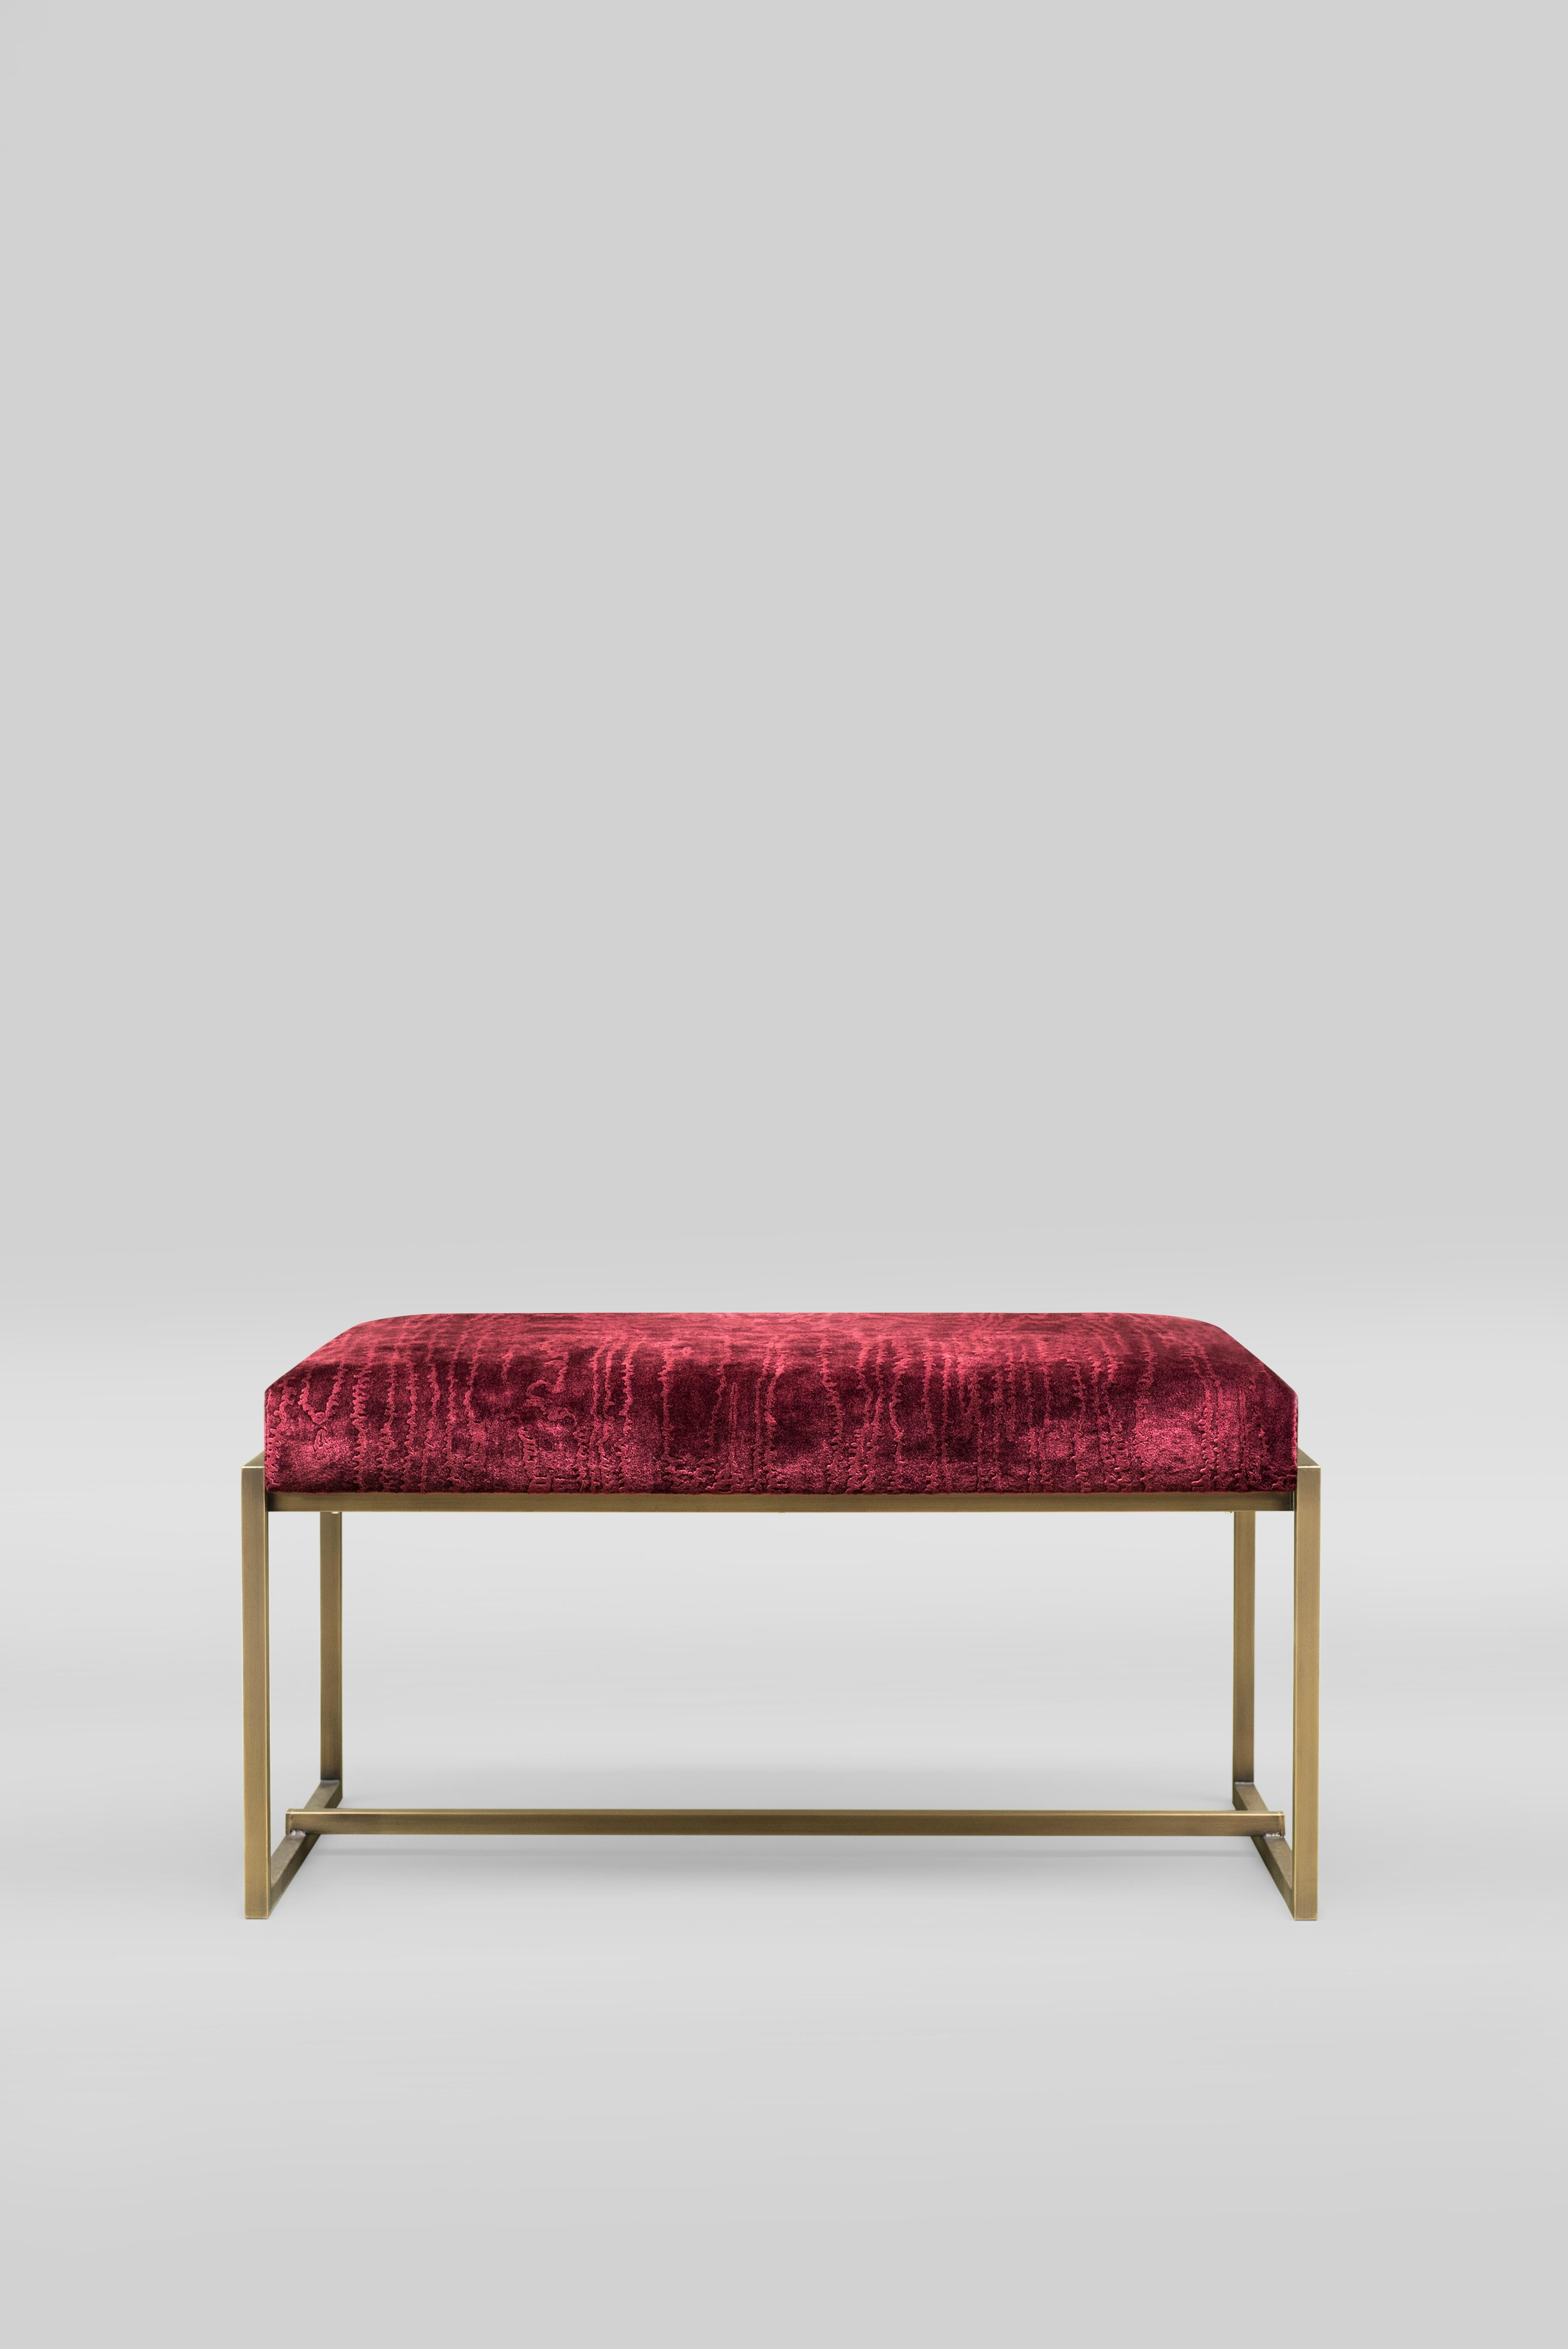 Upholstered bench on a slender metal frame designed by Peter Ghyczy in 2016. 

A light weight construction, easy to pick up and move. Customizable in size; can be used as footrest or bed-end.

Product type: Bench

Year of design: